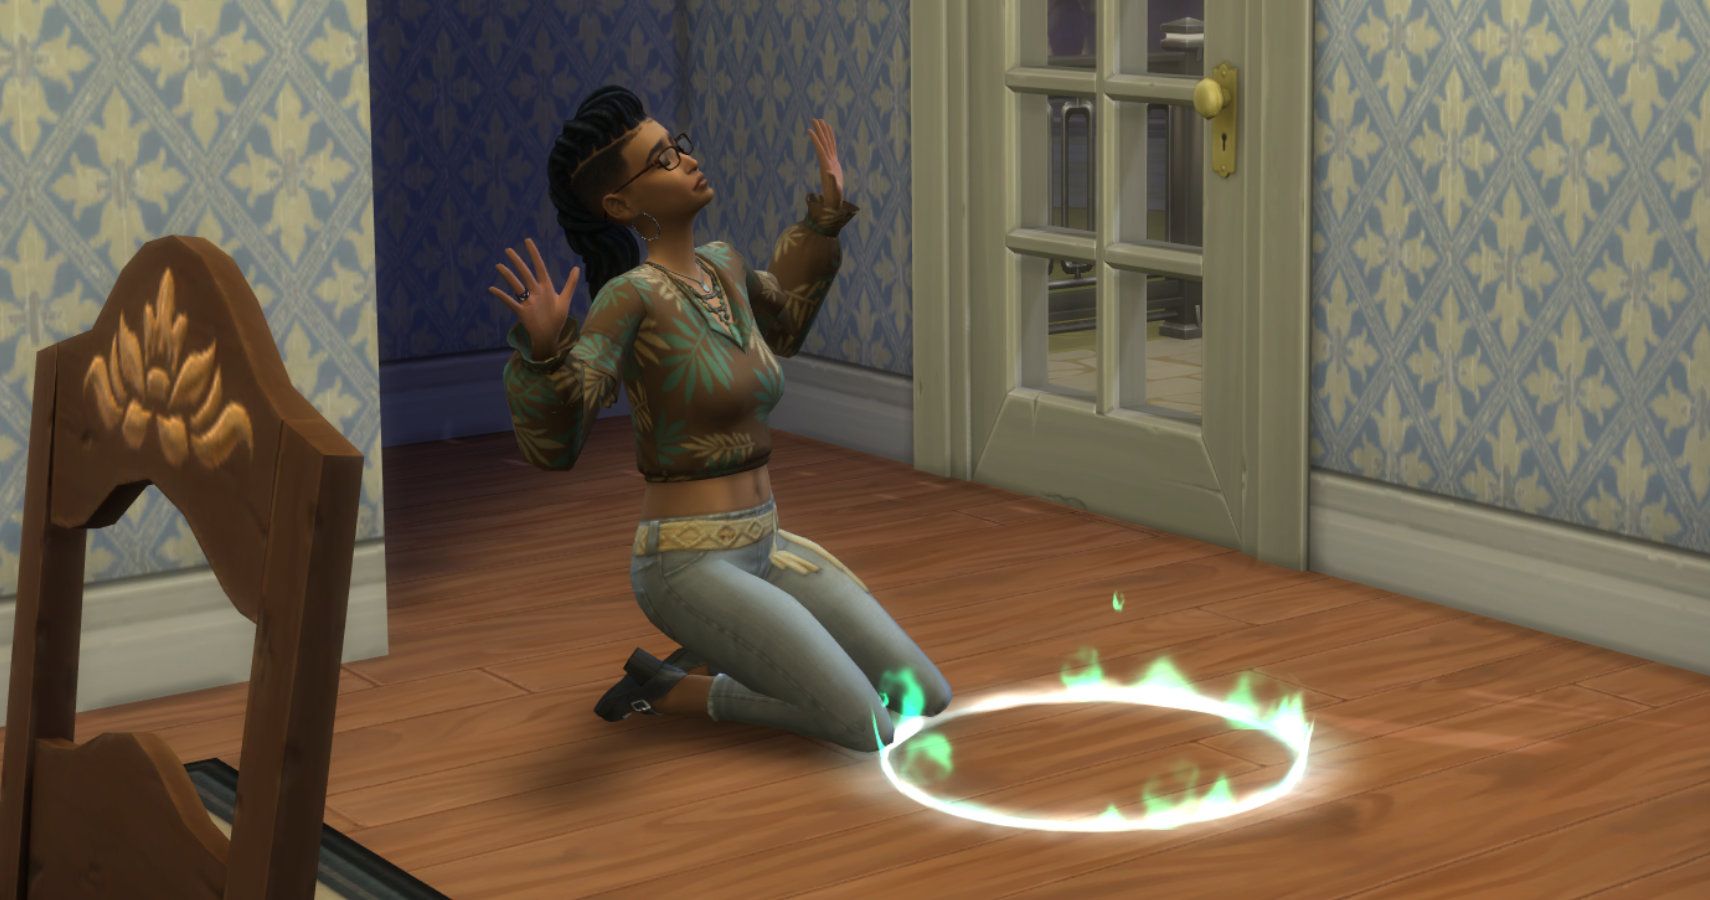 https://static1.thegamerimages.com/wordpress/wp-content/uploads/2021/01/Sims-4-Paranormal-Seance-circle-in-a-haunted-home.jpg